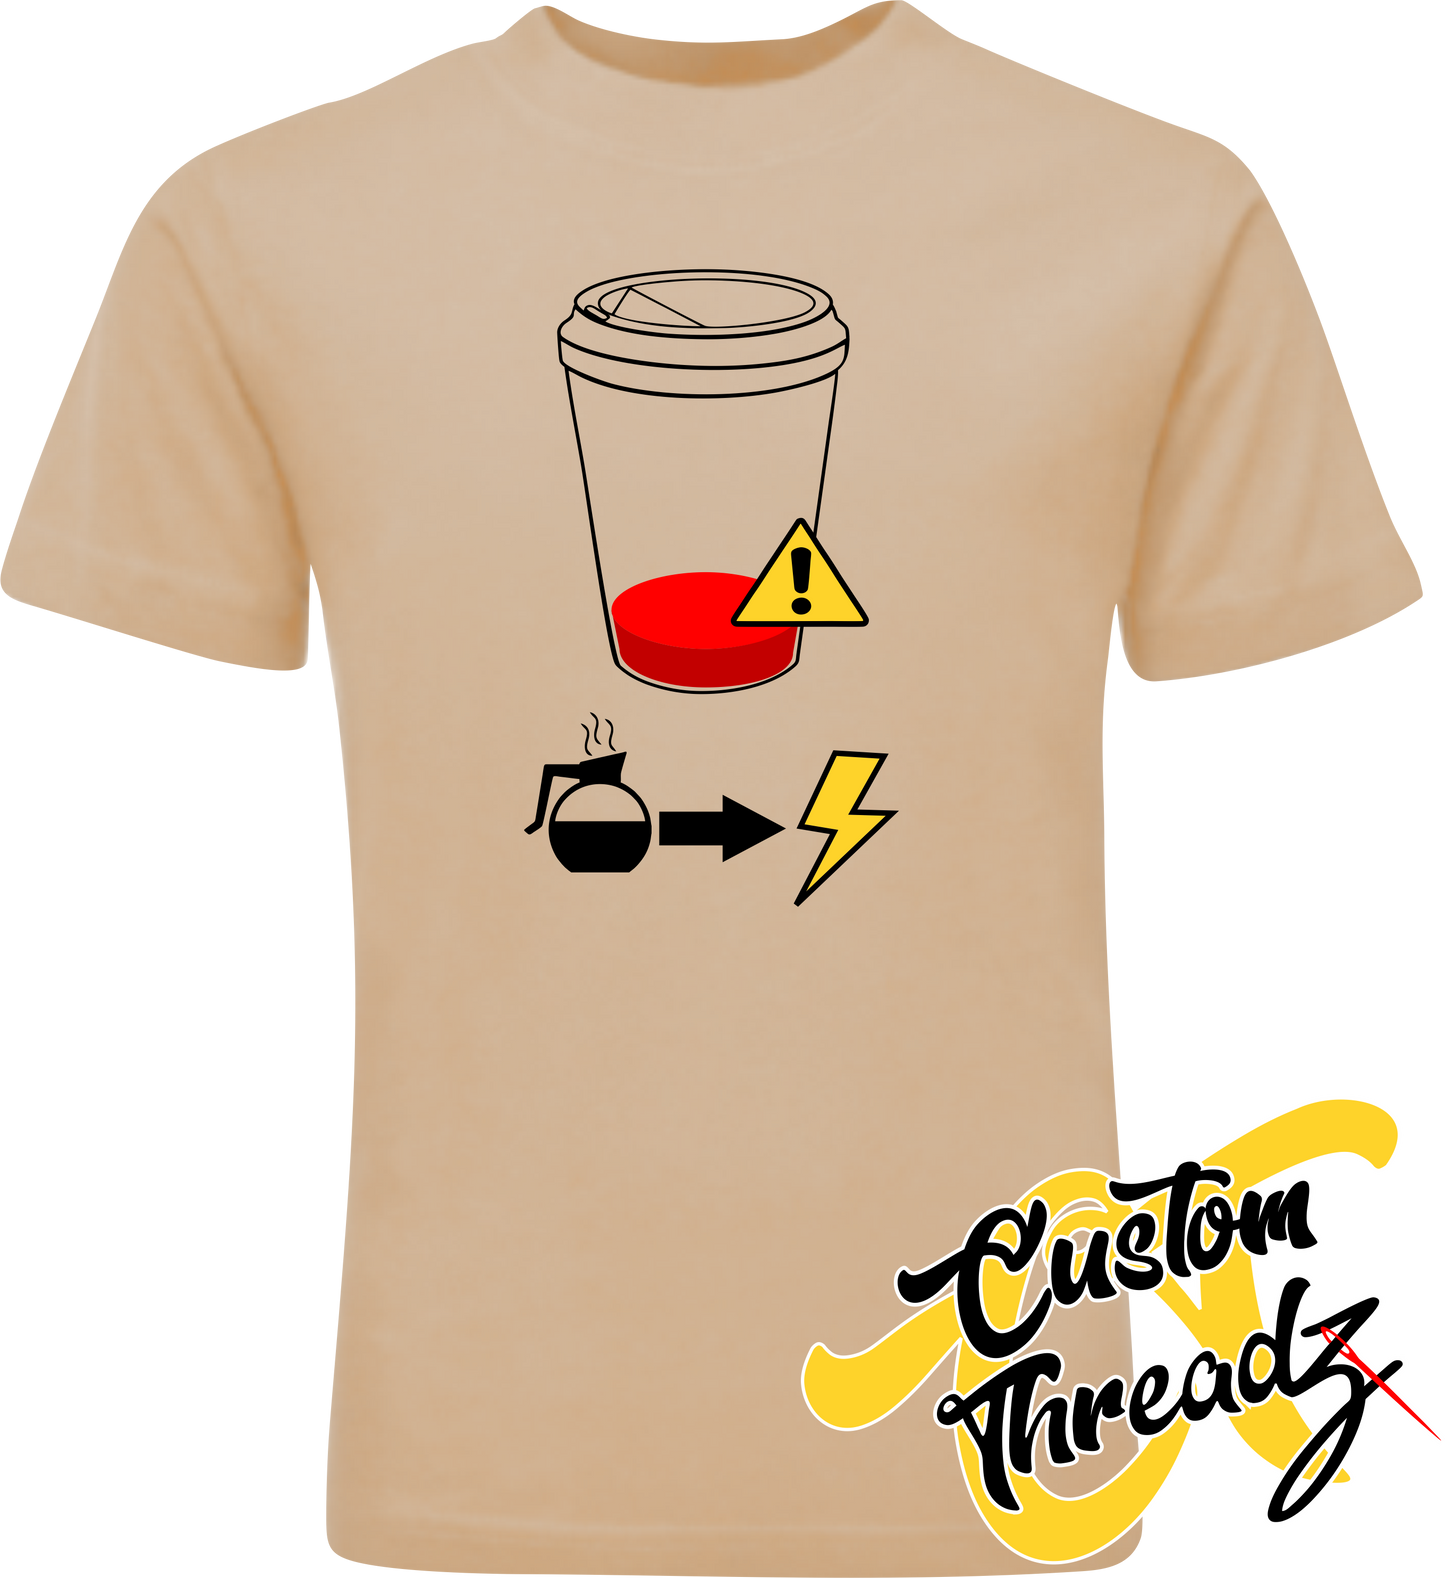 sand tee with low coffee refill DTG printed design